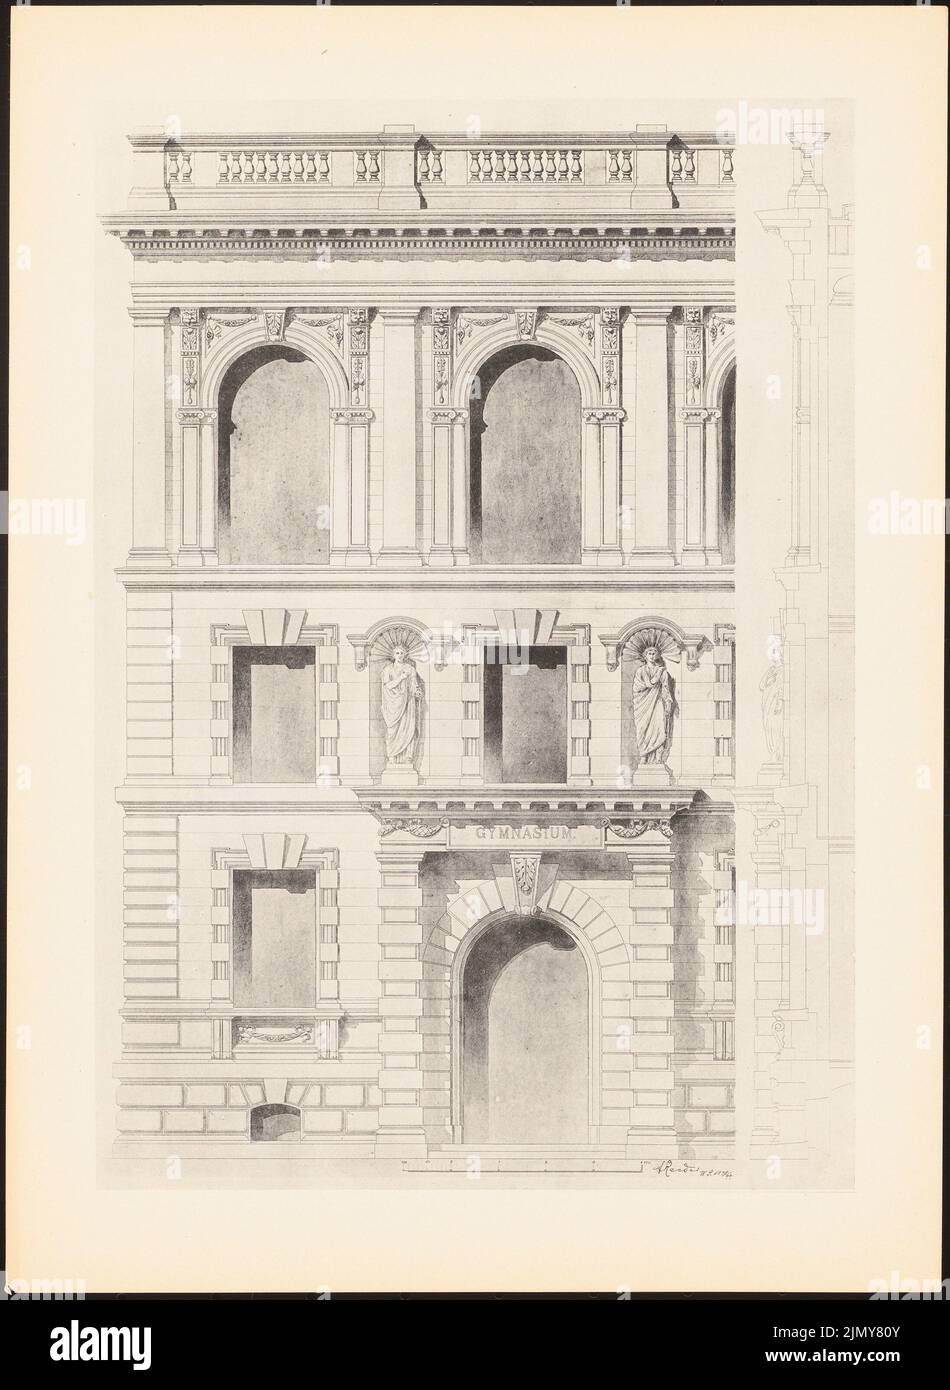 Raeder A., high school. (From: Prints of seminar works by the Royal Technical University Berlin, Vol. I) (1889/1899): View, facade cut vertical. Print on paper, 33.2 x 24.3 cm (including scan edges) Stock Photo